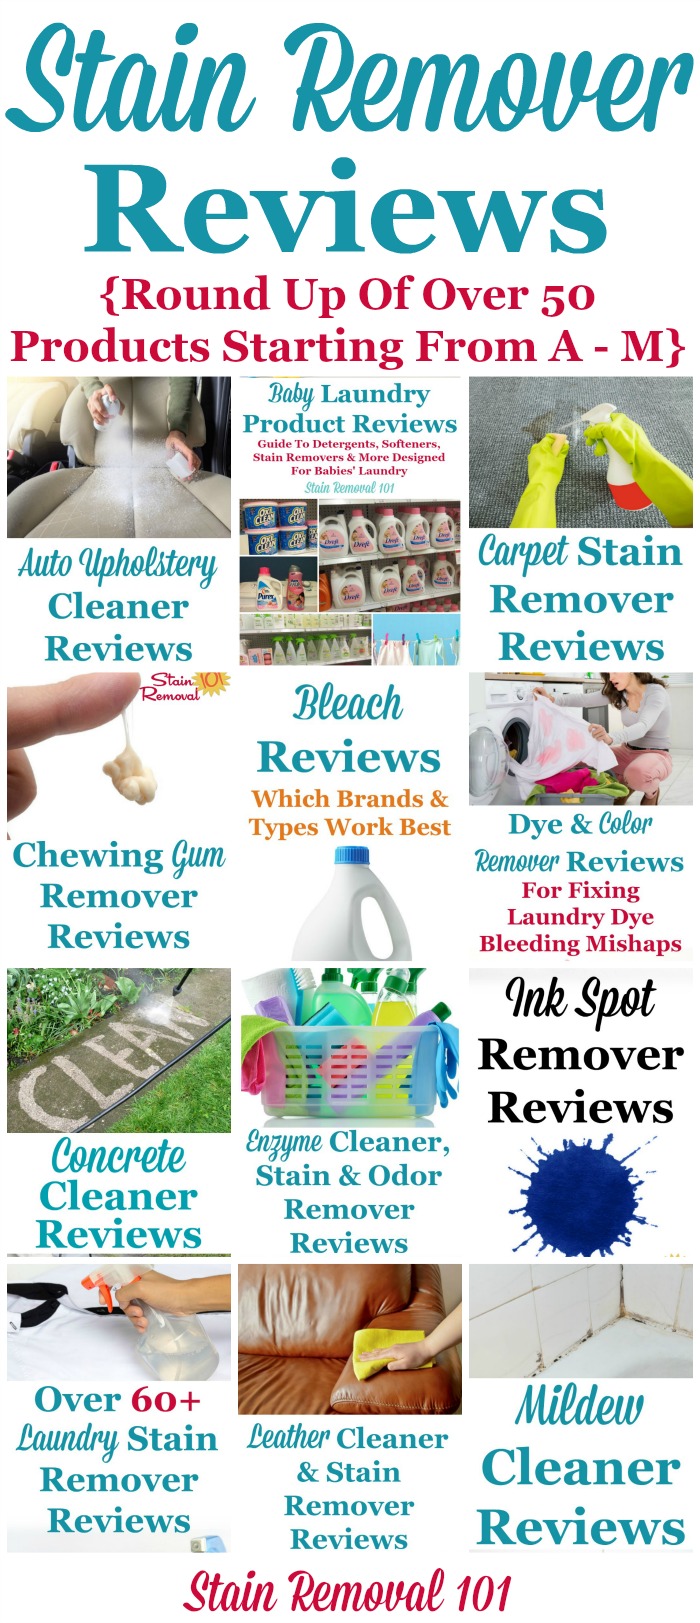 Here is a round up of over 50 stain remover reviews, for products from A through M in the alphabet, to find out which products work best, and which don't {on Stain Removal 101} #StainRemover #SpotRemover #StainRemovers